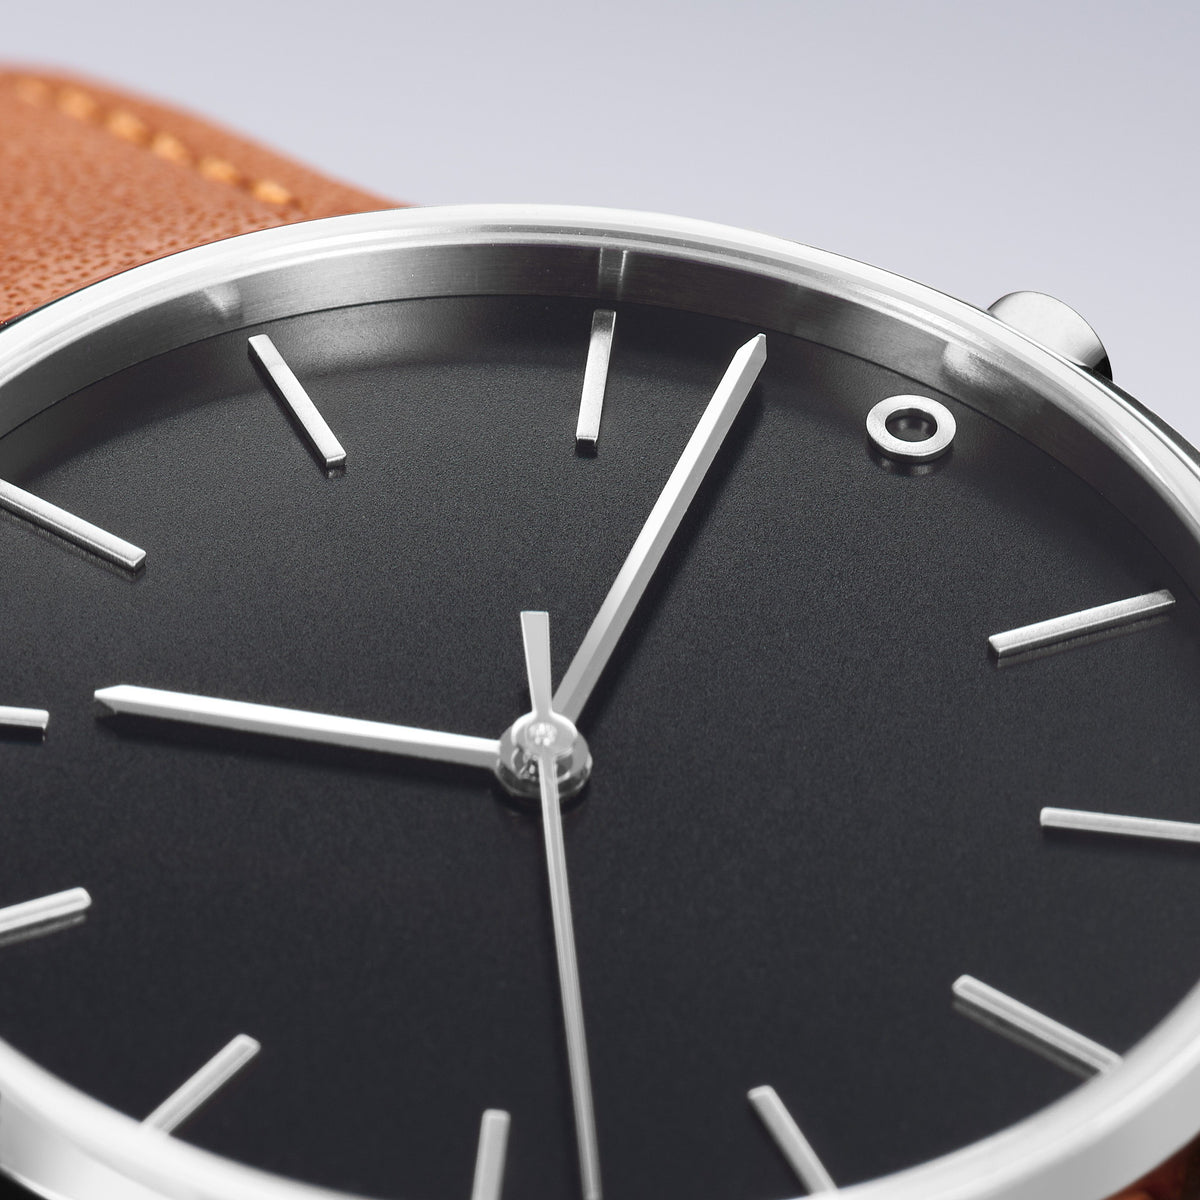 The Black and Silver Watch - Leather